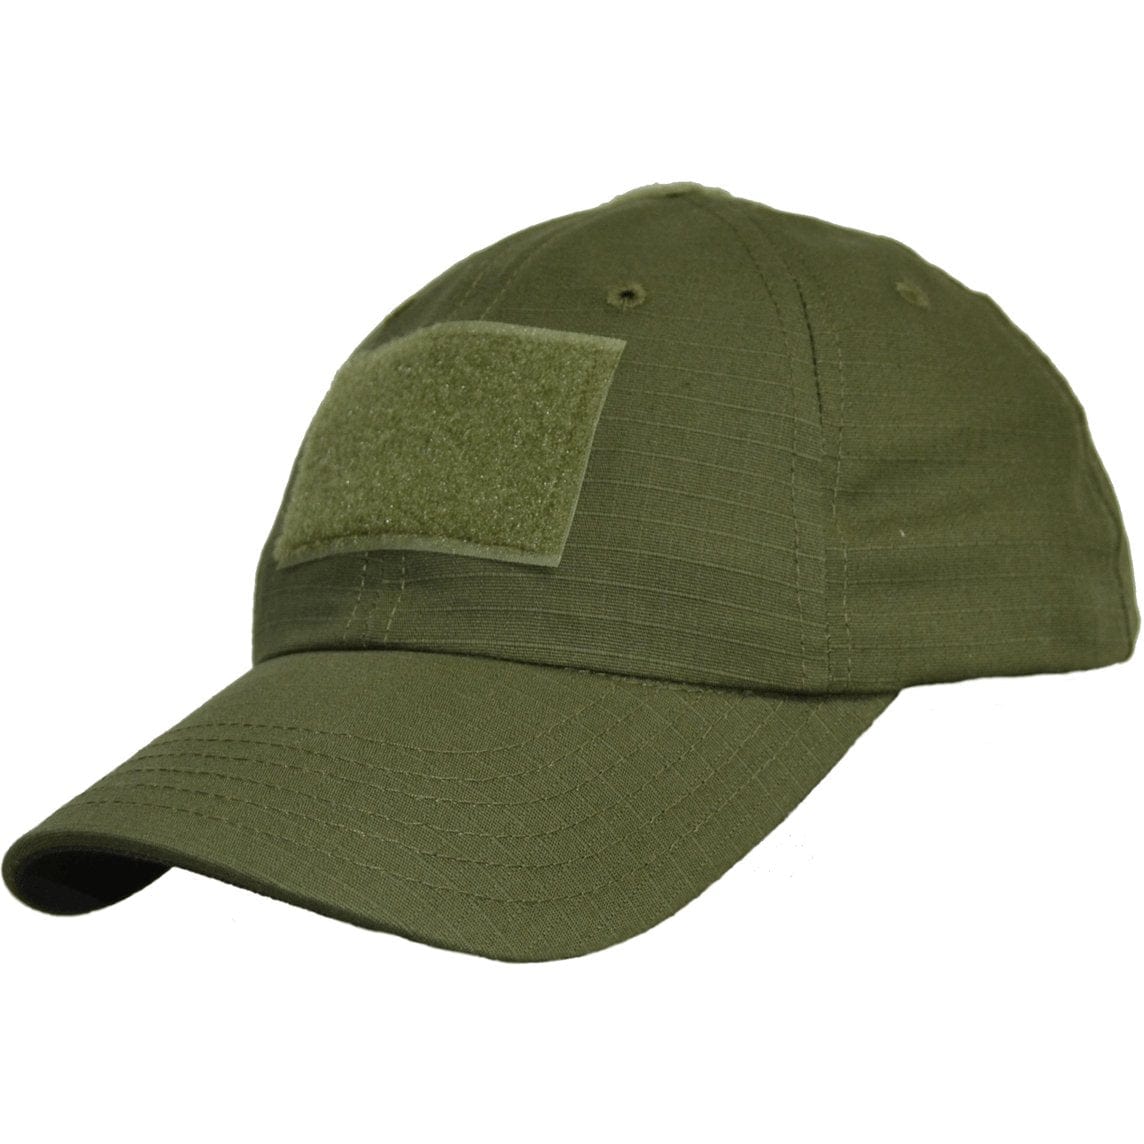 Tactical Gear Junkie Apparel Olive Drab TGJ US Made Tactical Operator Hat - Solid Back